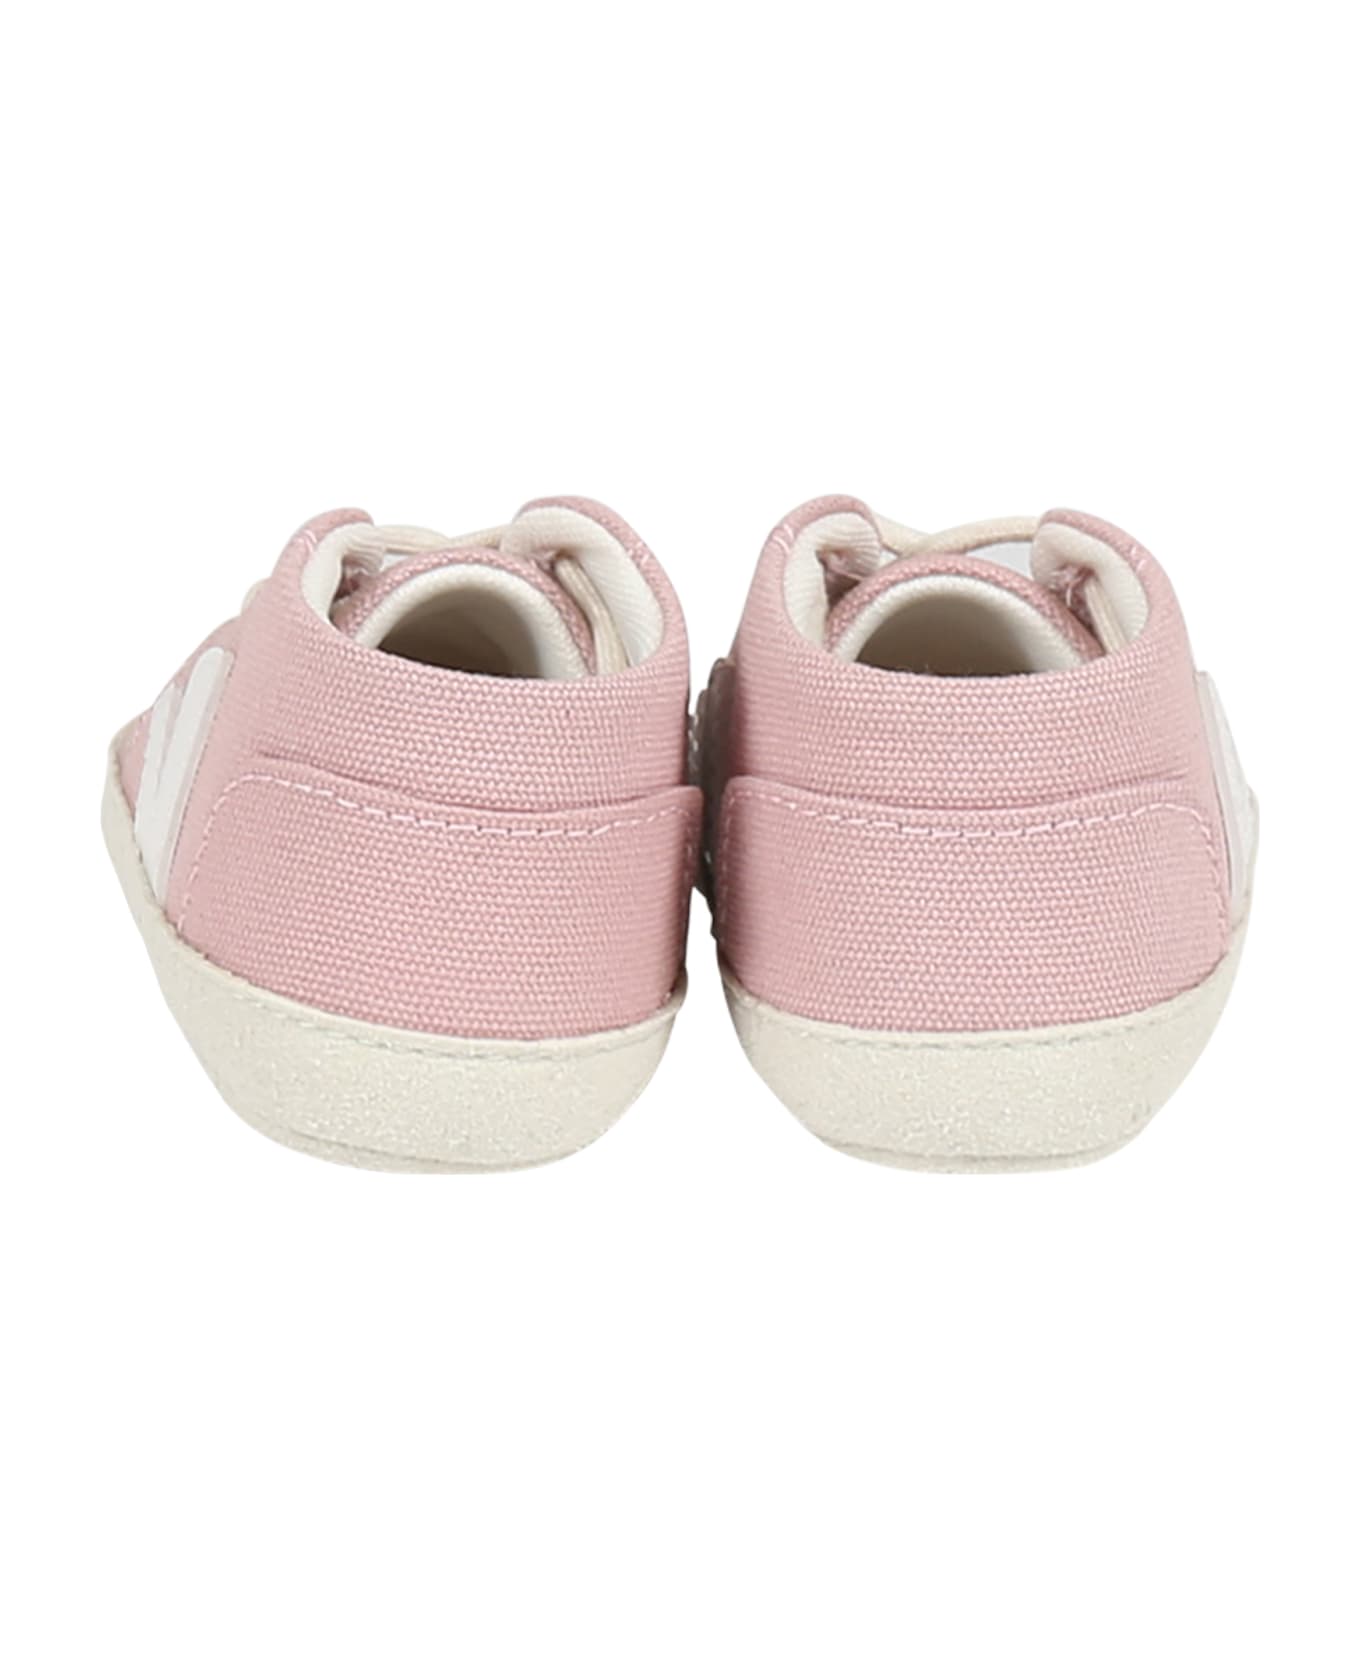 Veja Pink Sneakers For Baby Girl With White Logo - Pink シューズ